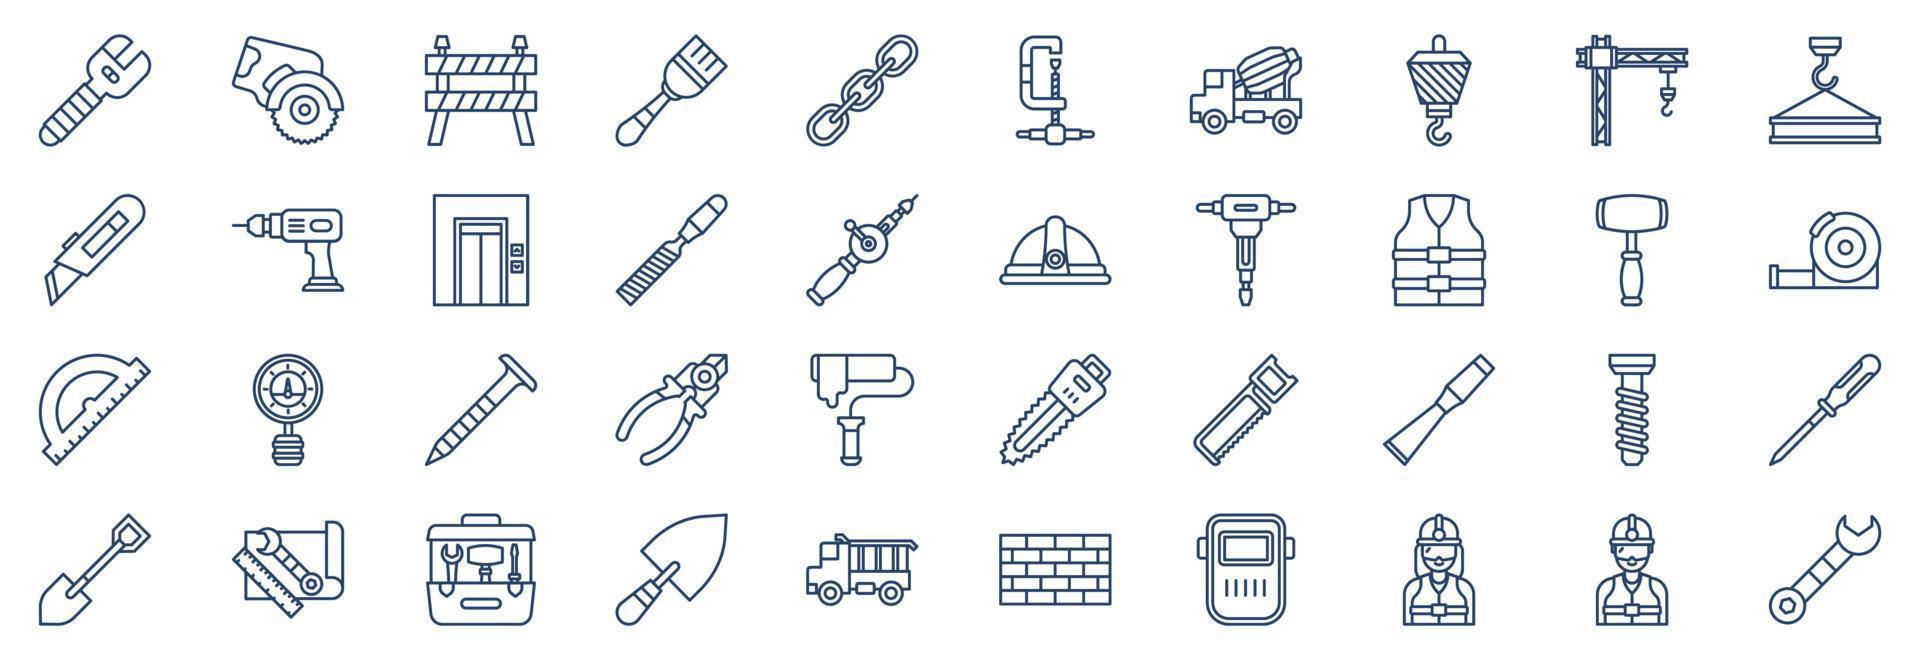 Collection of icons related to Construction tools, including icons like Spanner, Barrier, Chain and more. vector illustrations, Pixel Perfect set